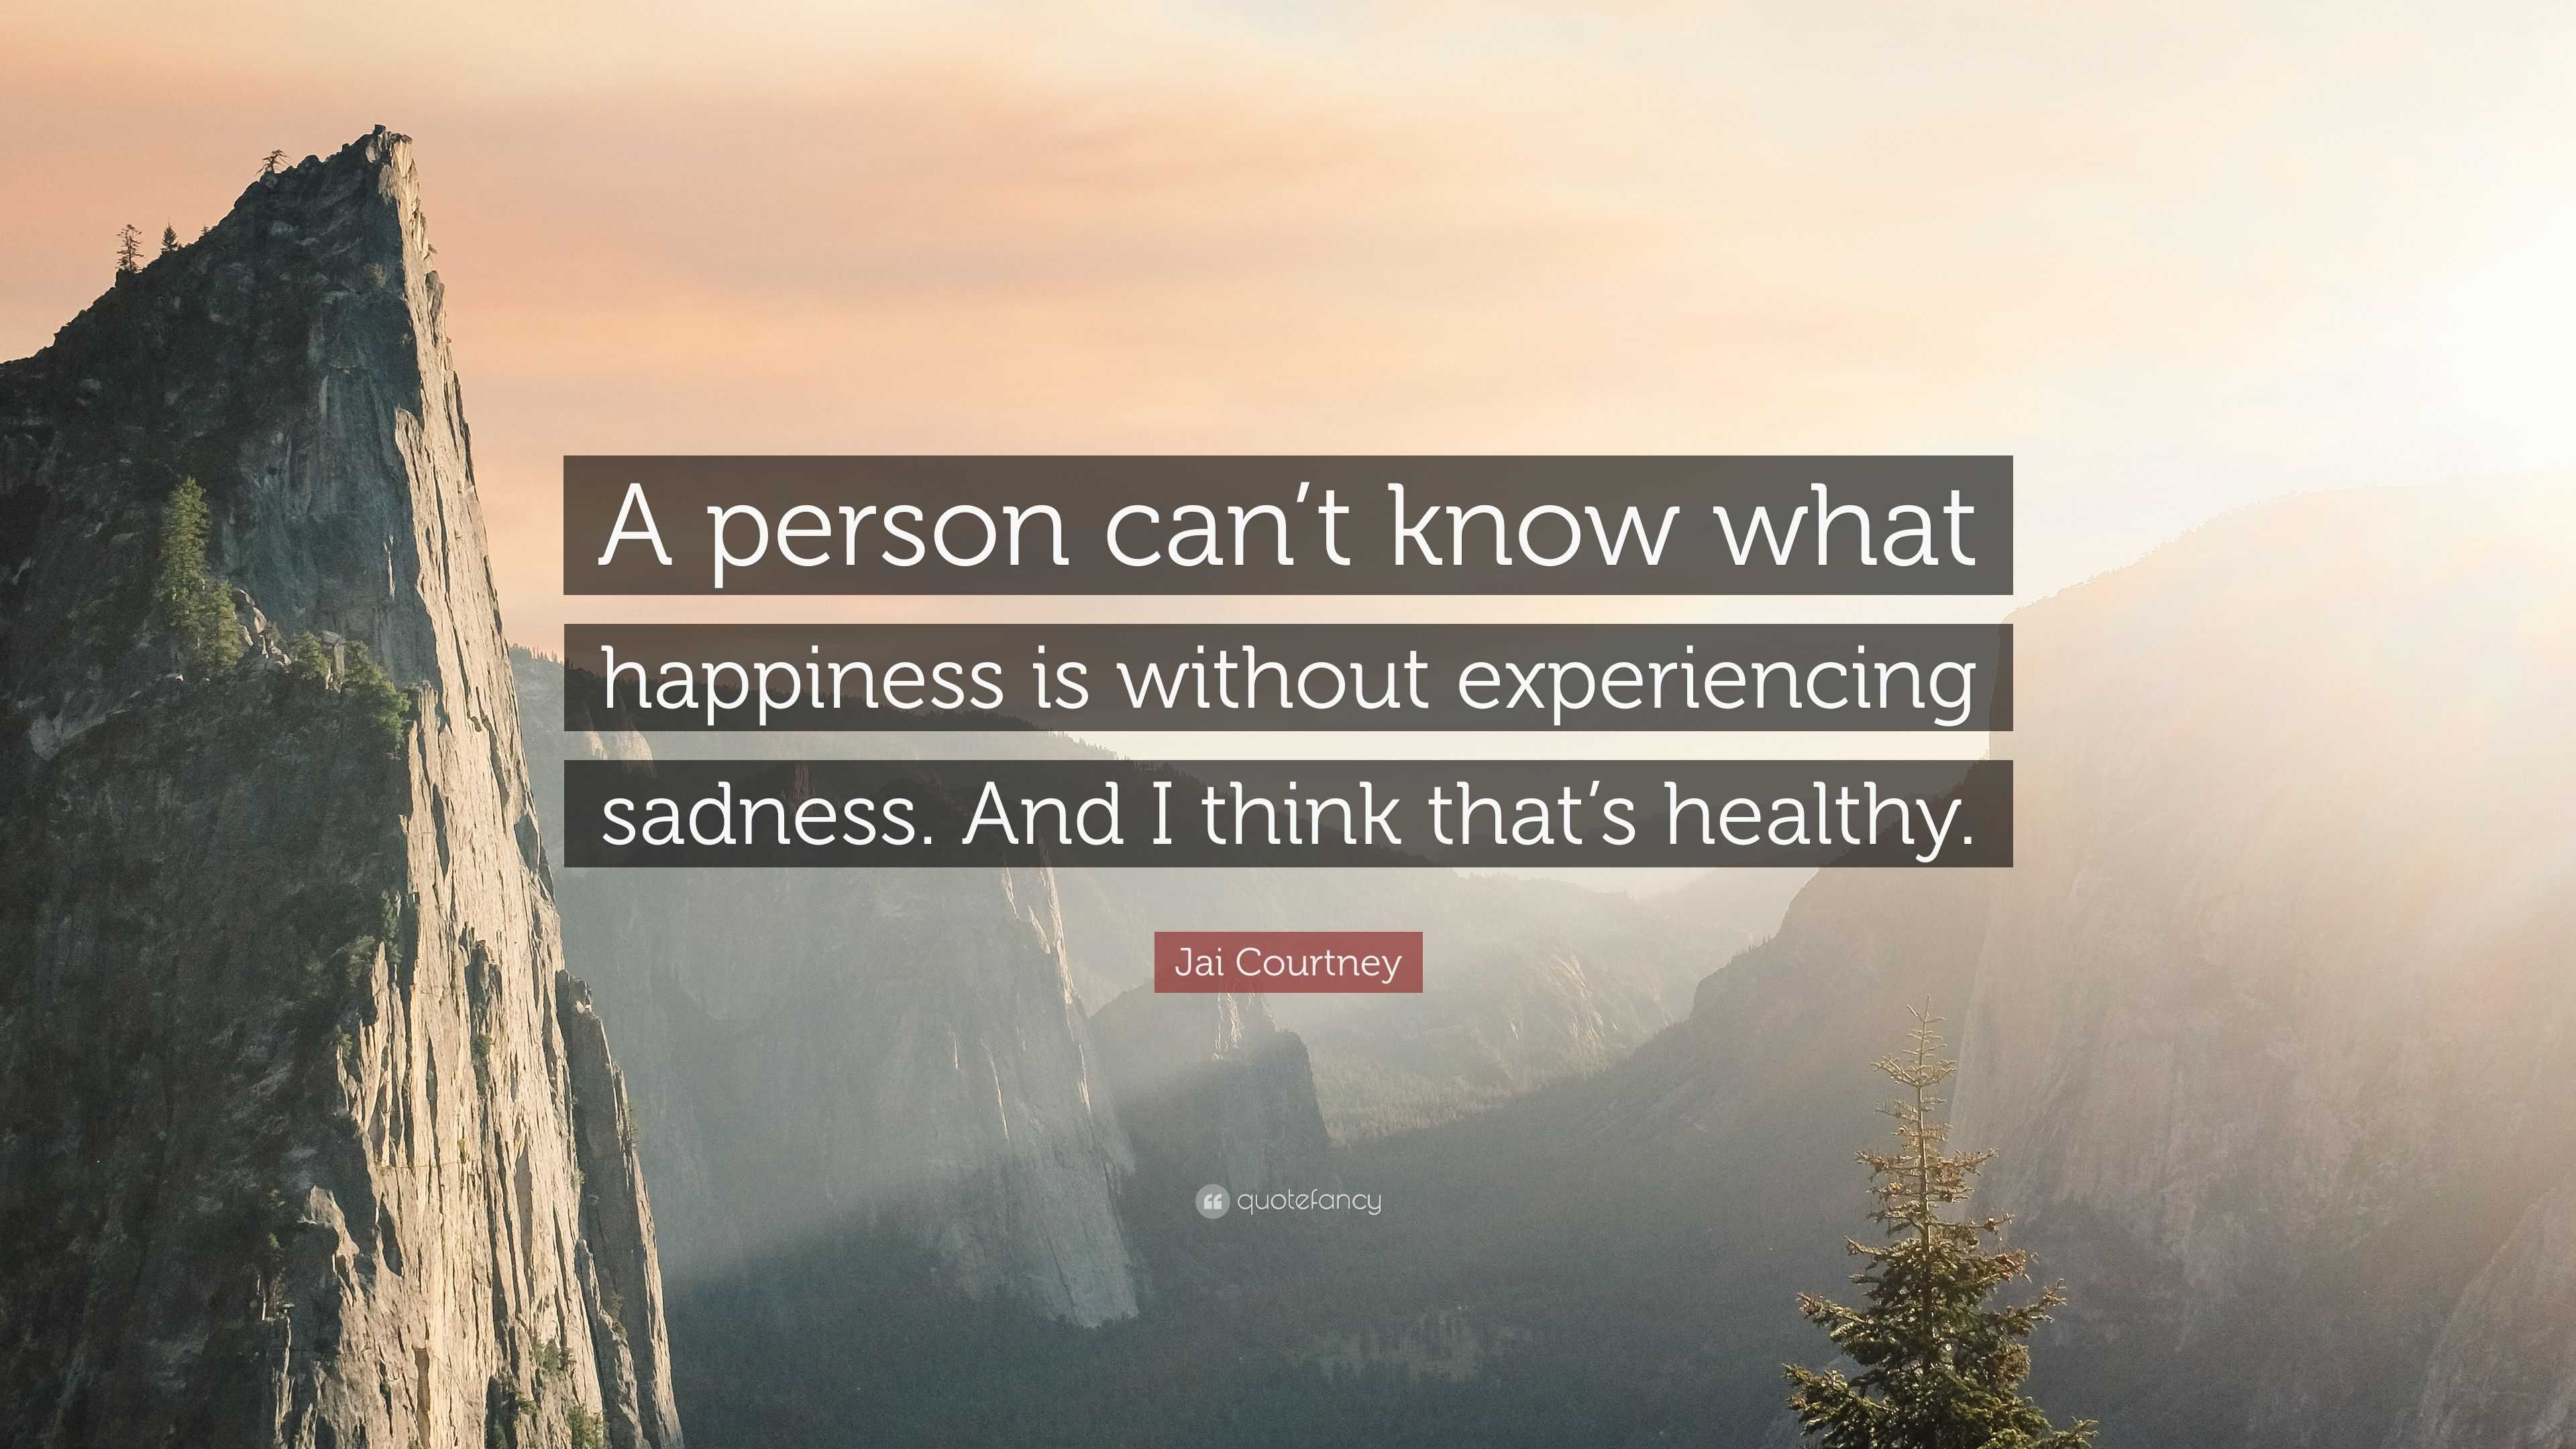 Jai Courtney Quote: “A person can’t know what happiness is without ...